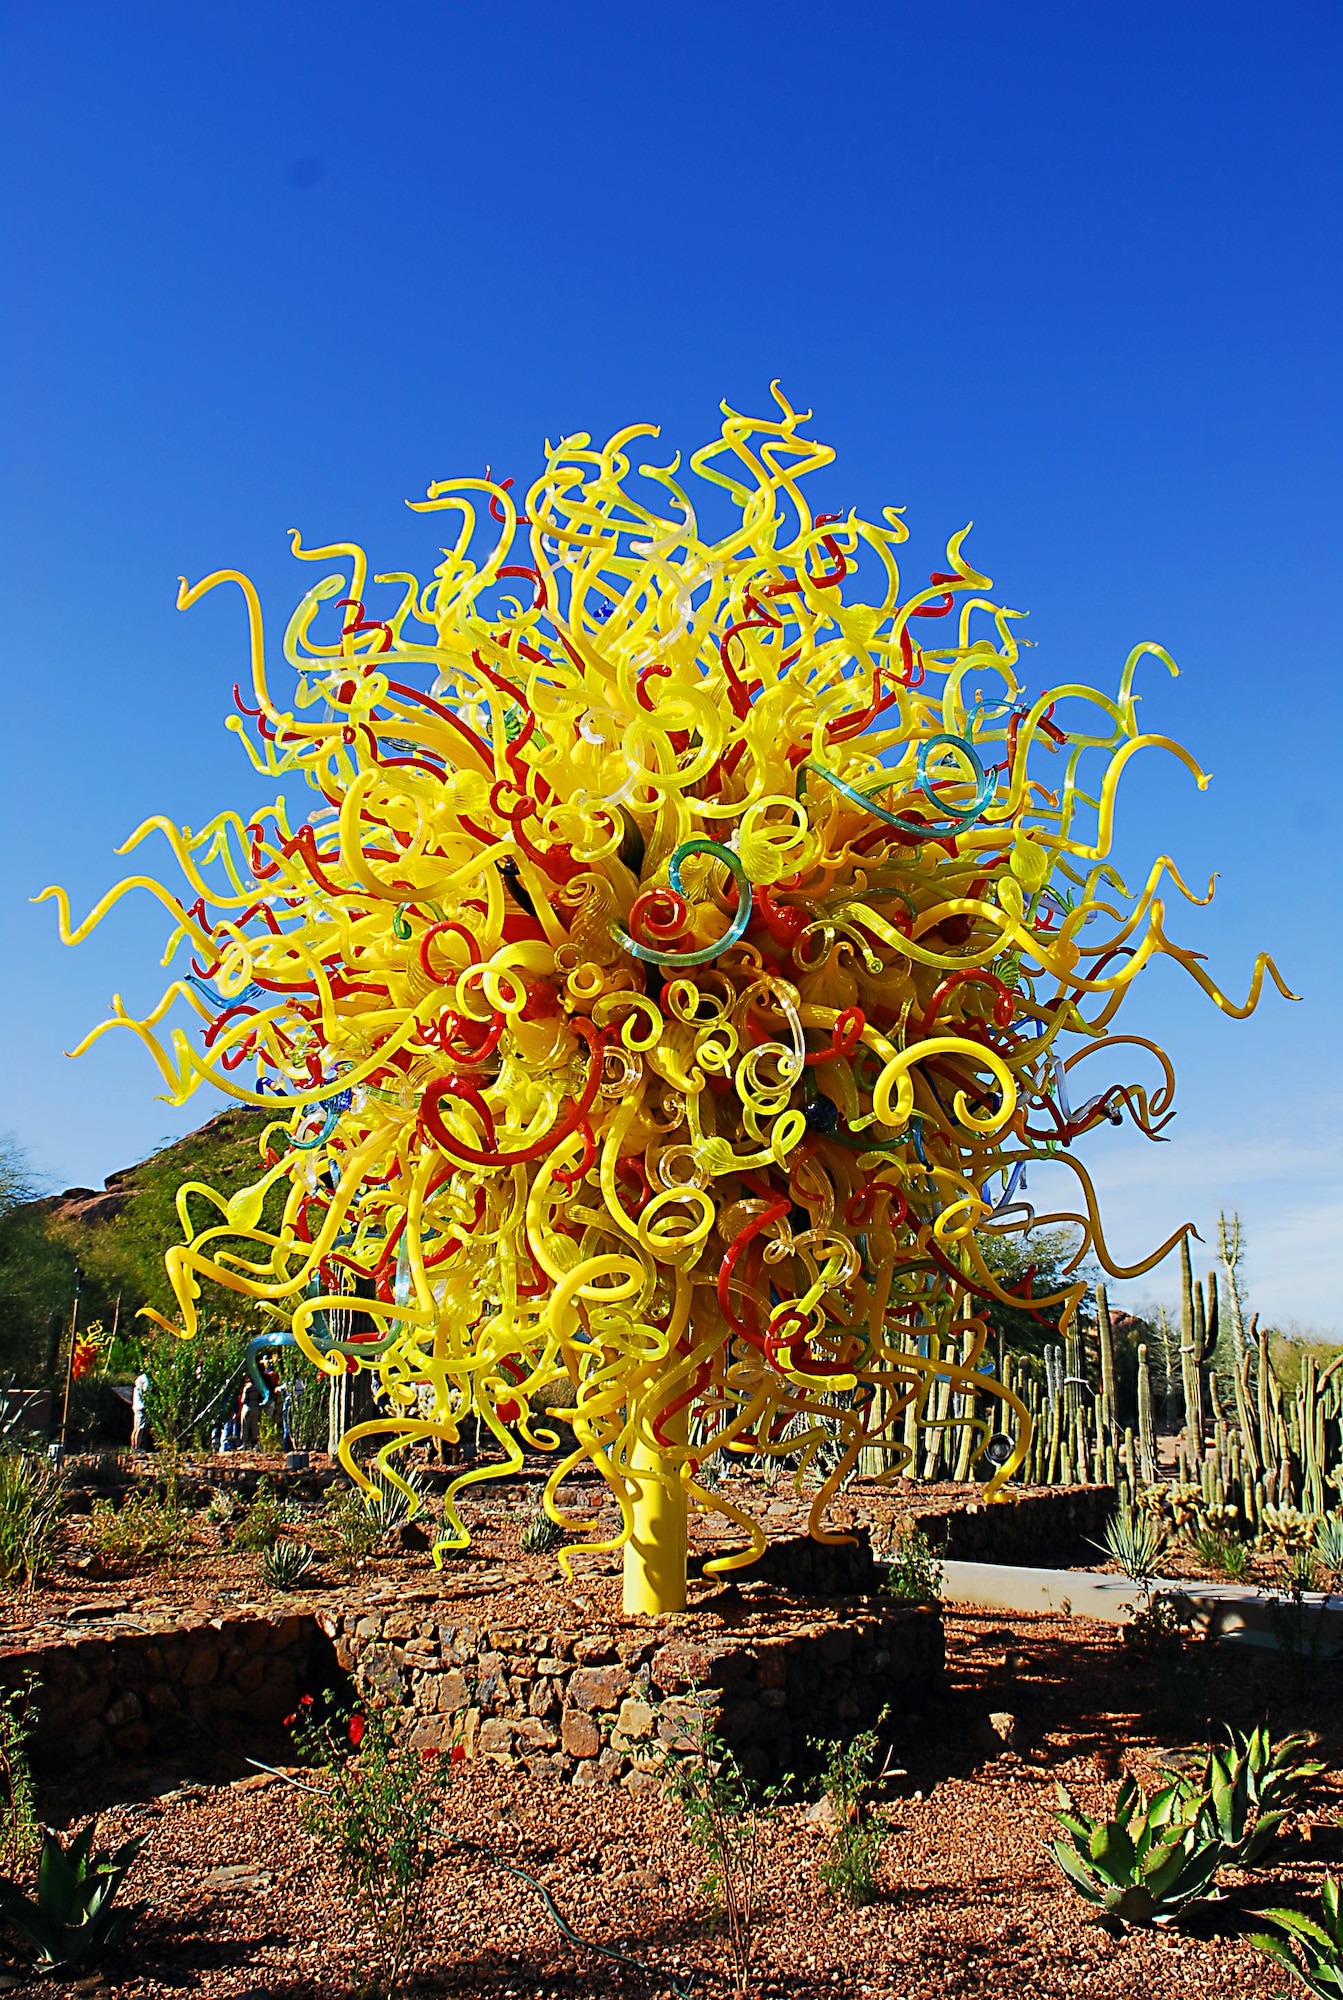 Sculptures made by artist, Dale Chihuly are on display at The Desert Botanical Gardens now through May 31. "The Sun" one of the many sculptures stands at the garden entrance. “Great care was taken with each piece,” said one of the garden experts who was present for the exhibit setup. “The pieces came in crates each with its own special formed foam. Many of the pieces came in smaller crates and were assembled here.” Admission to the garden is $15 and reservations are available.